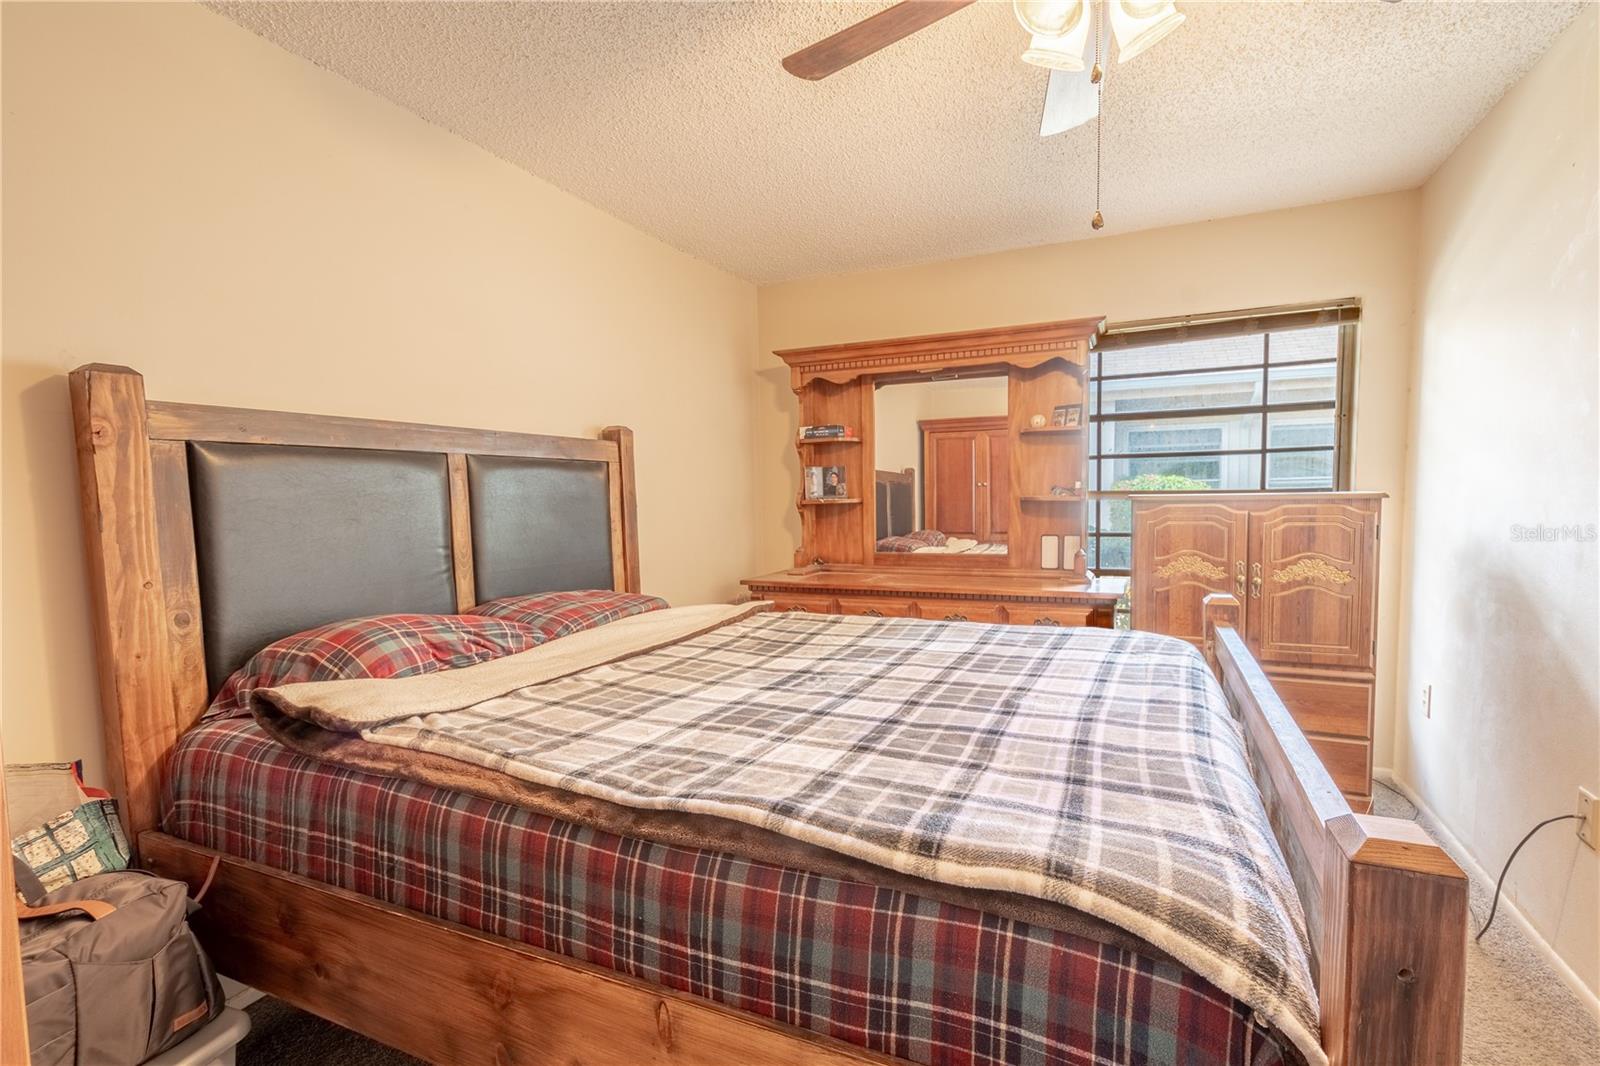 The primary bedroom features carpet, a large walk-in closet, and a ceiling fan with a light kit.